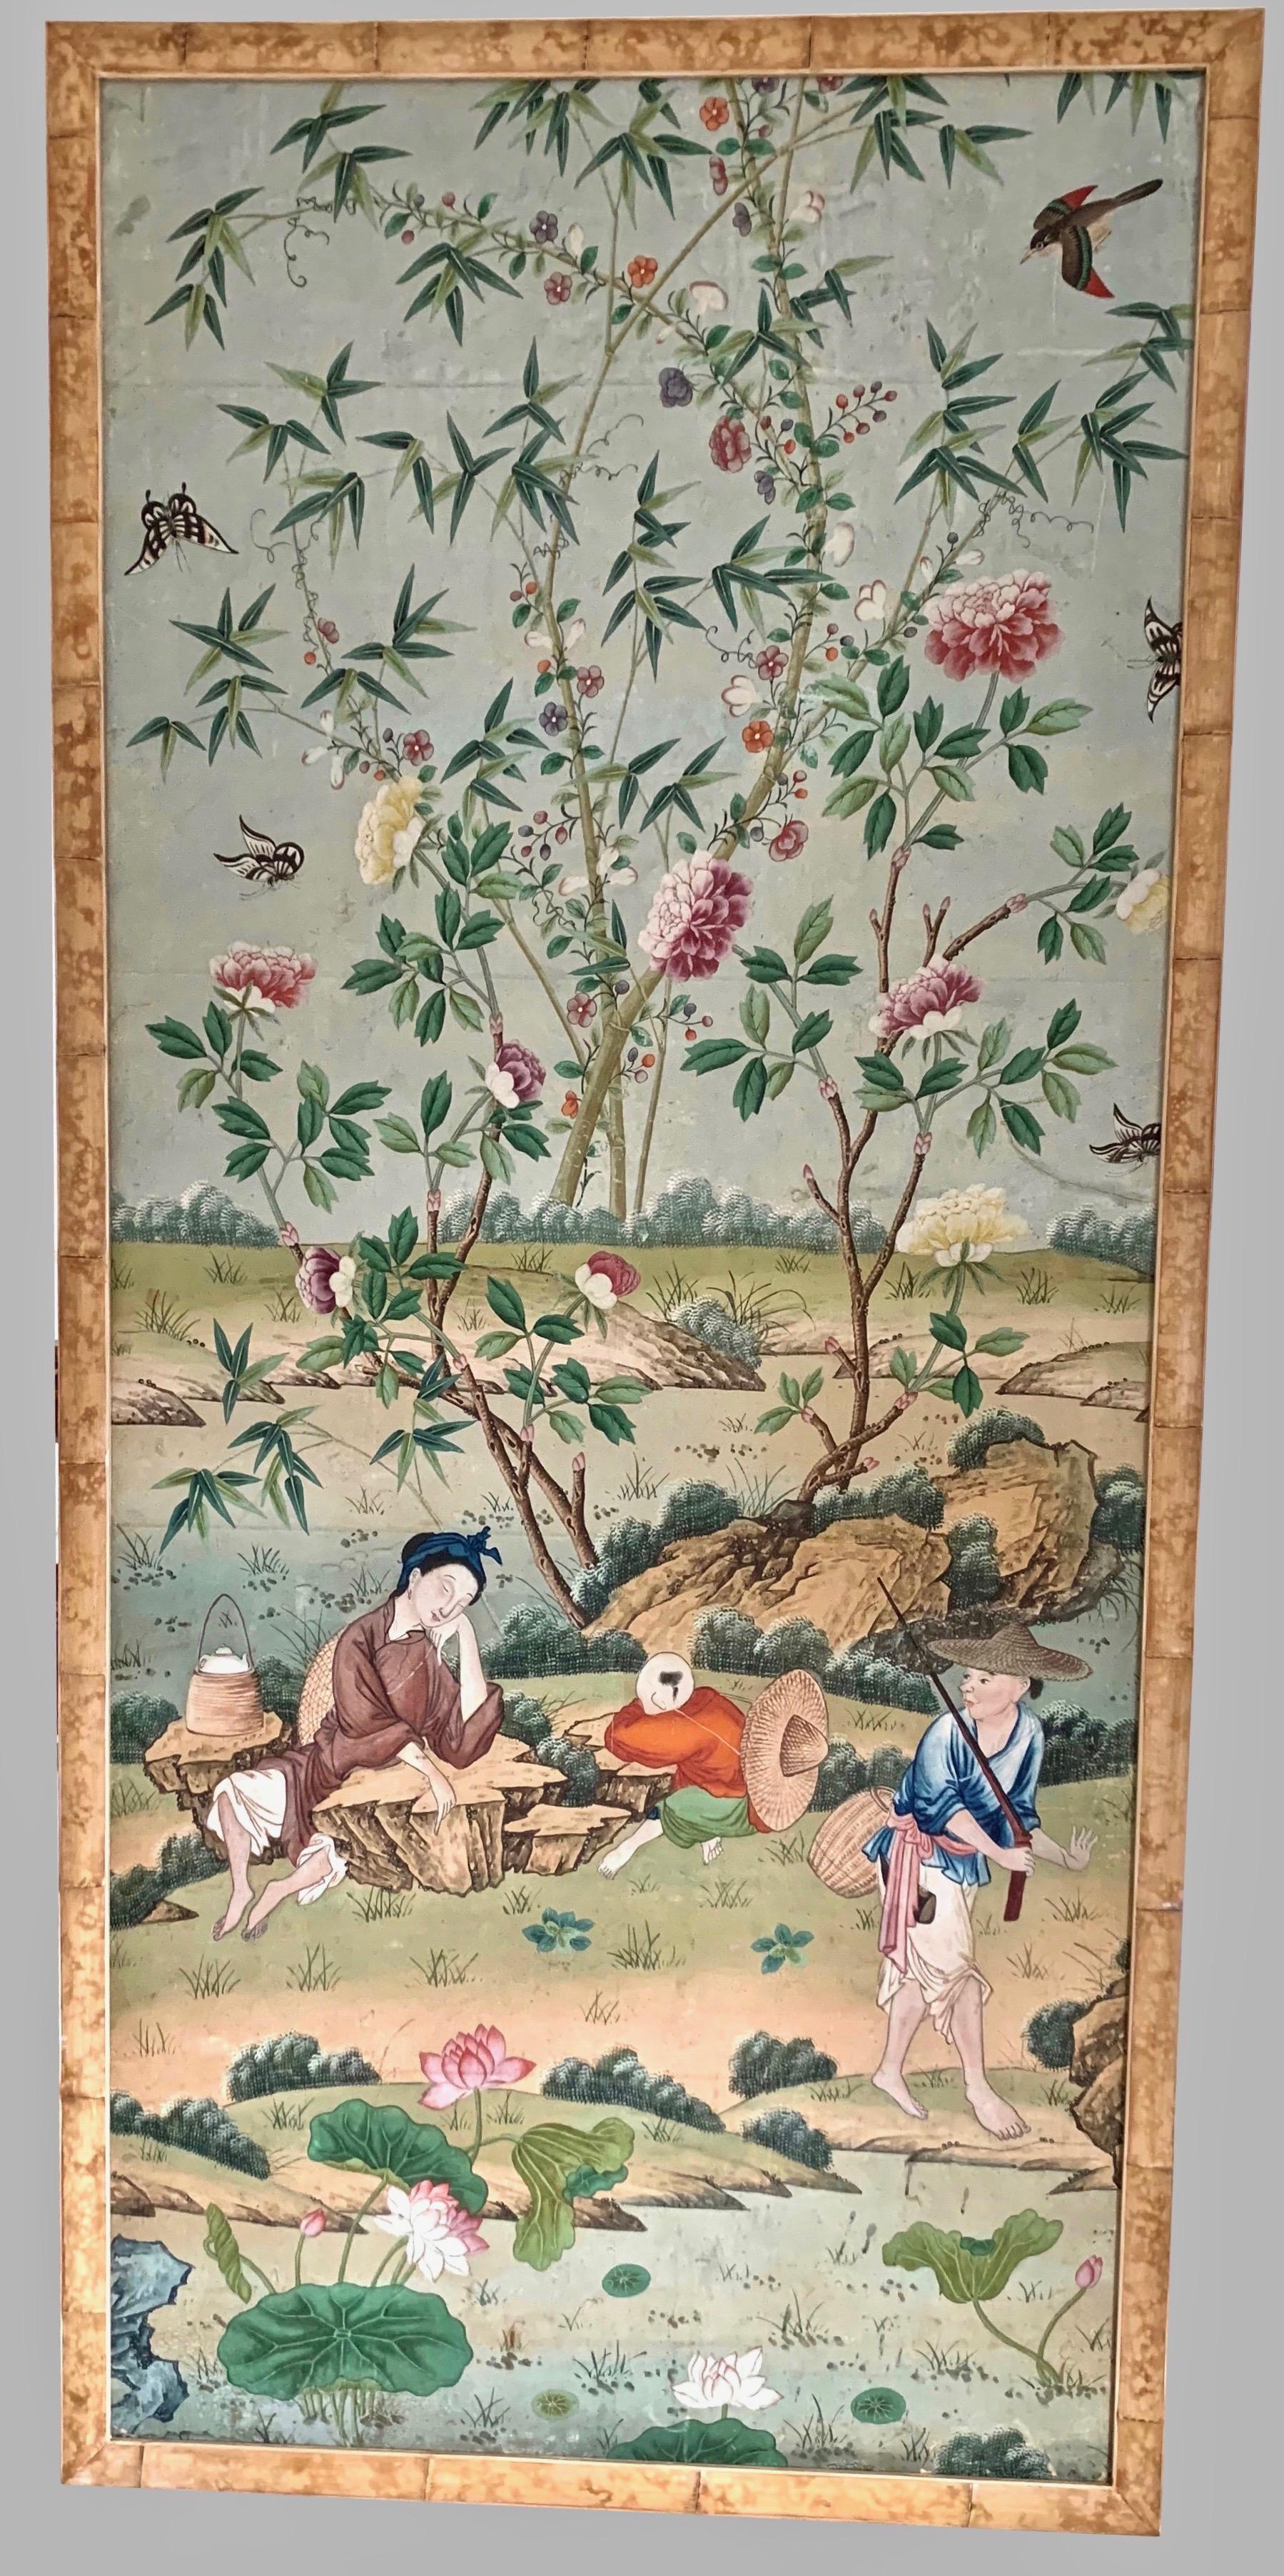 A rare set of four Chinese wallpaper panels, each with a pale mint-green ground and expansive hand-painted landscapes with figures; the upper registers depicting sinuous bamboo entwined with blossoming vines and tendrils amid flowering Peony trees,